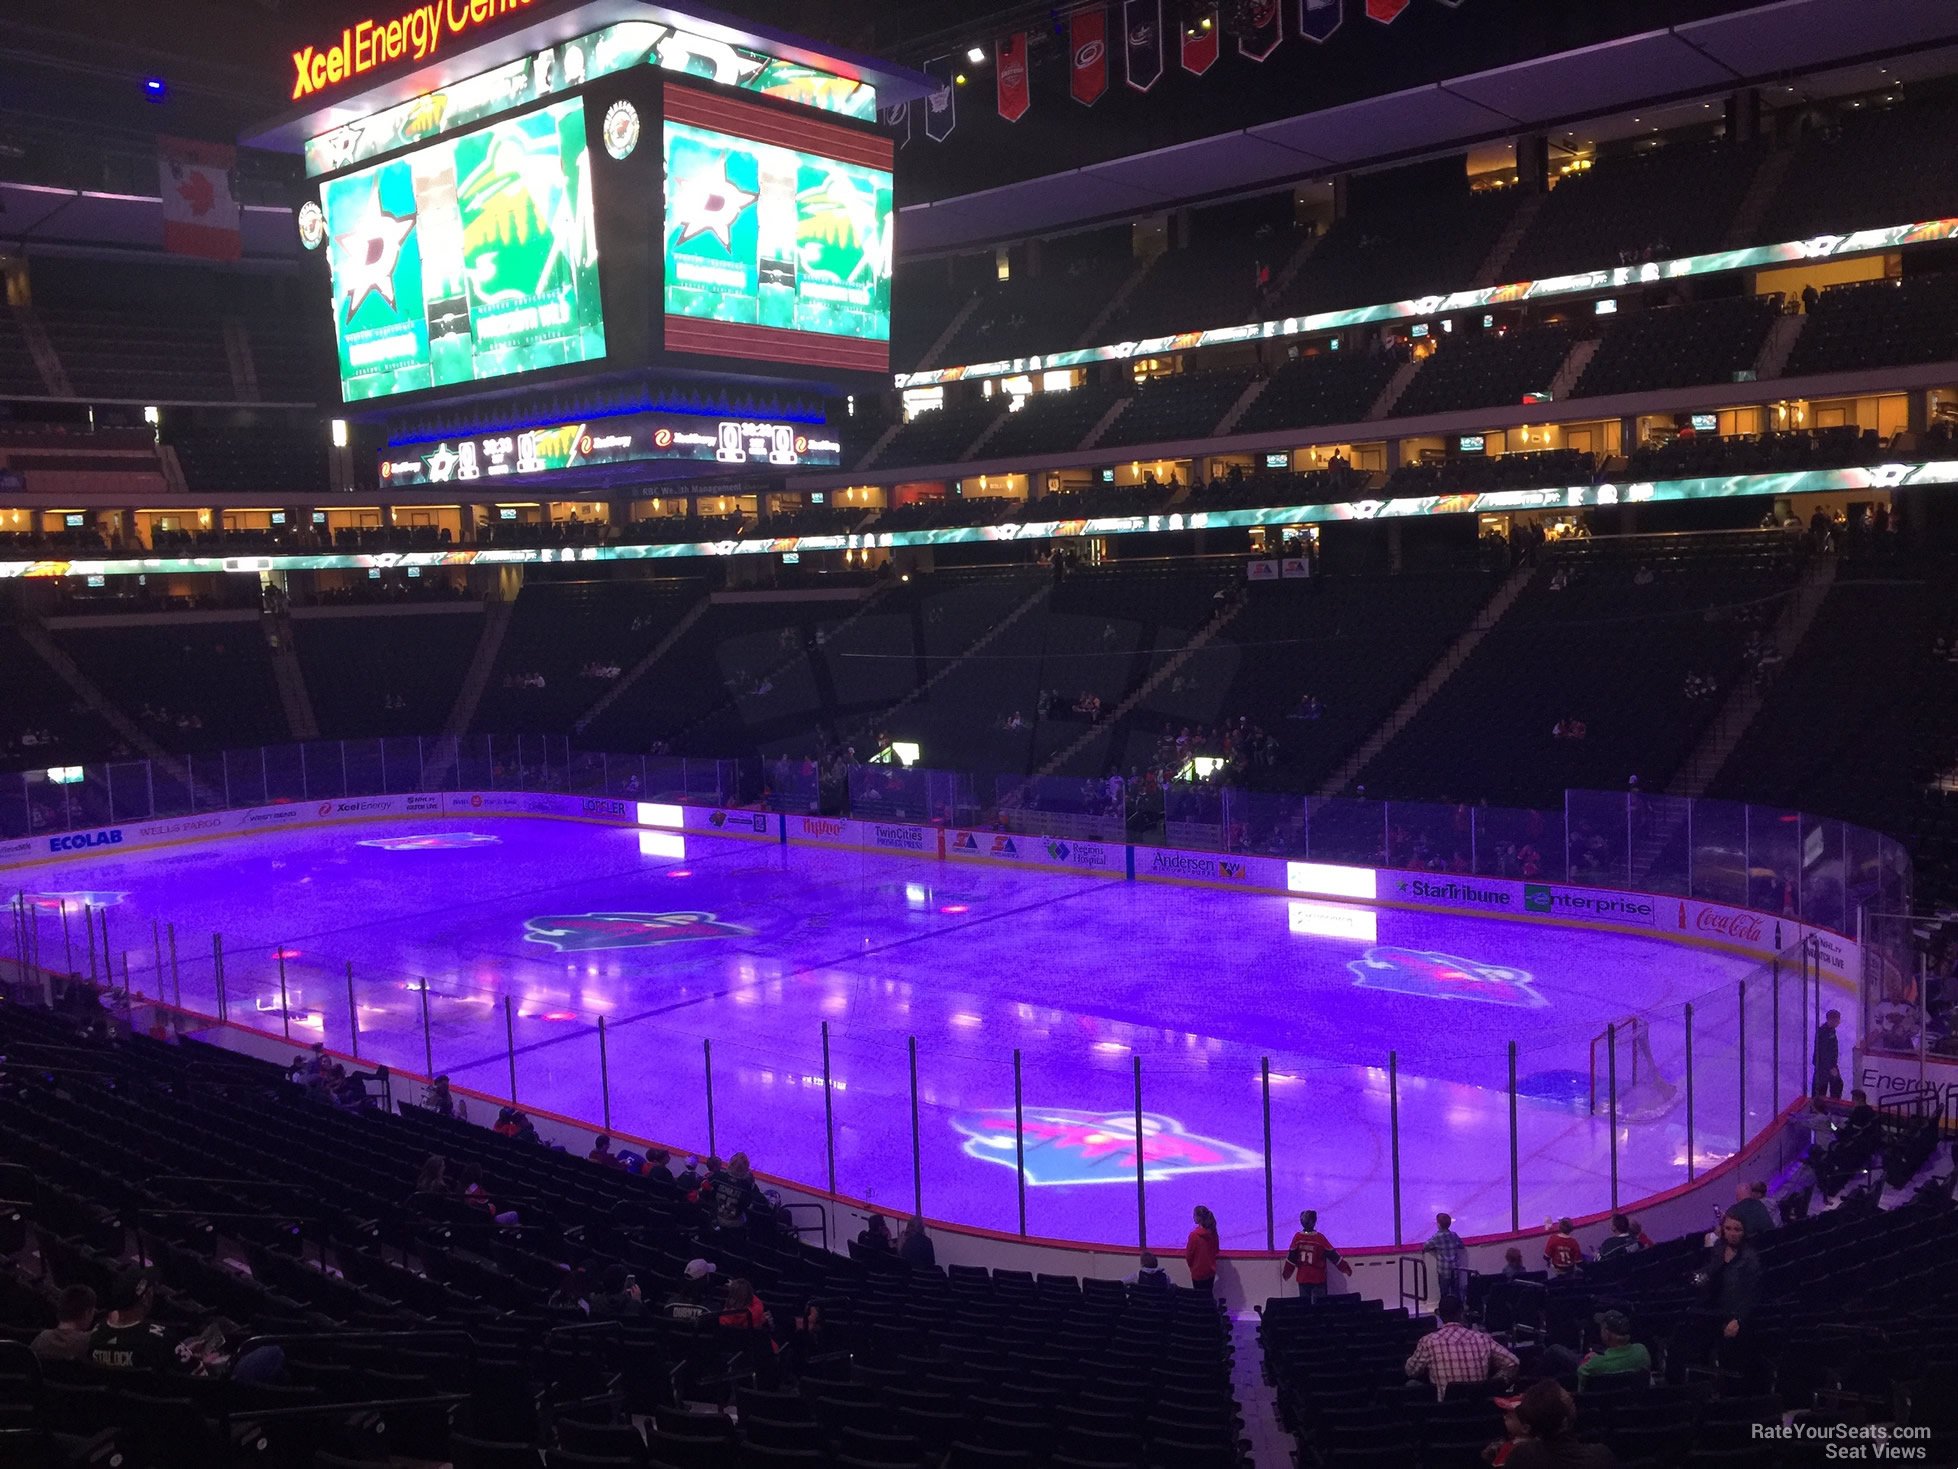 section 126, row 24 seat view  for hockey - xcel energy center